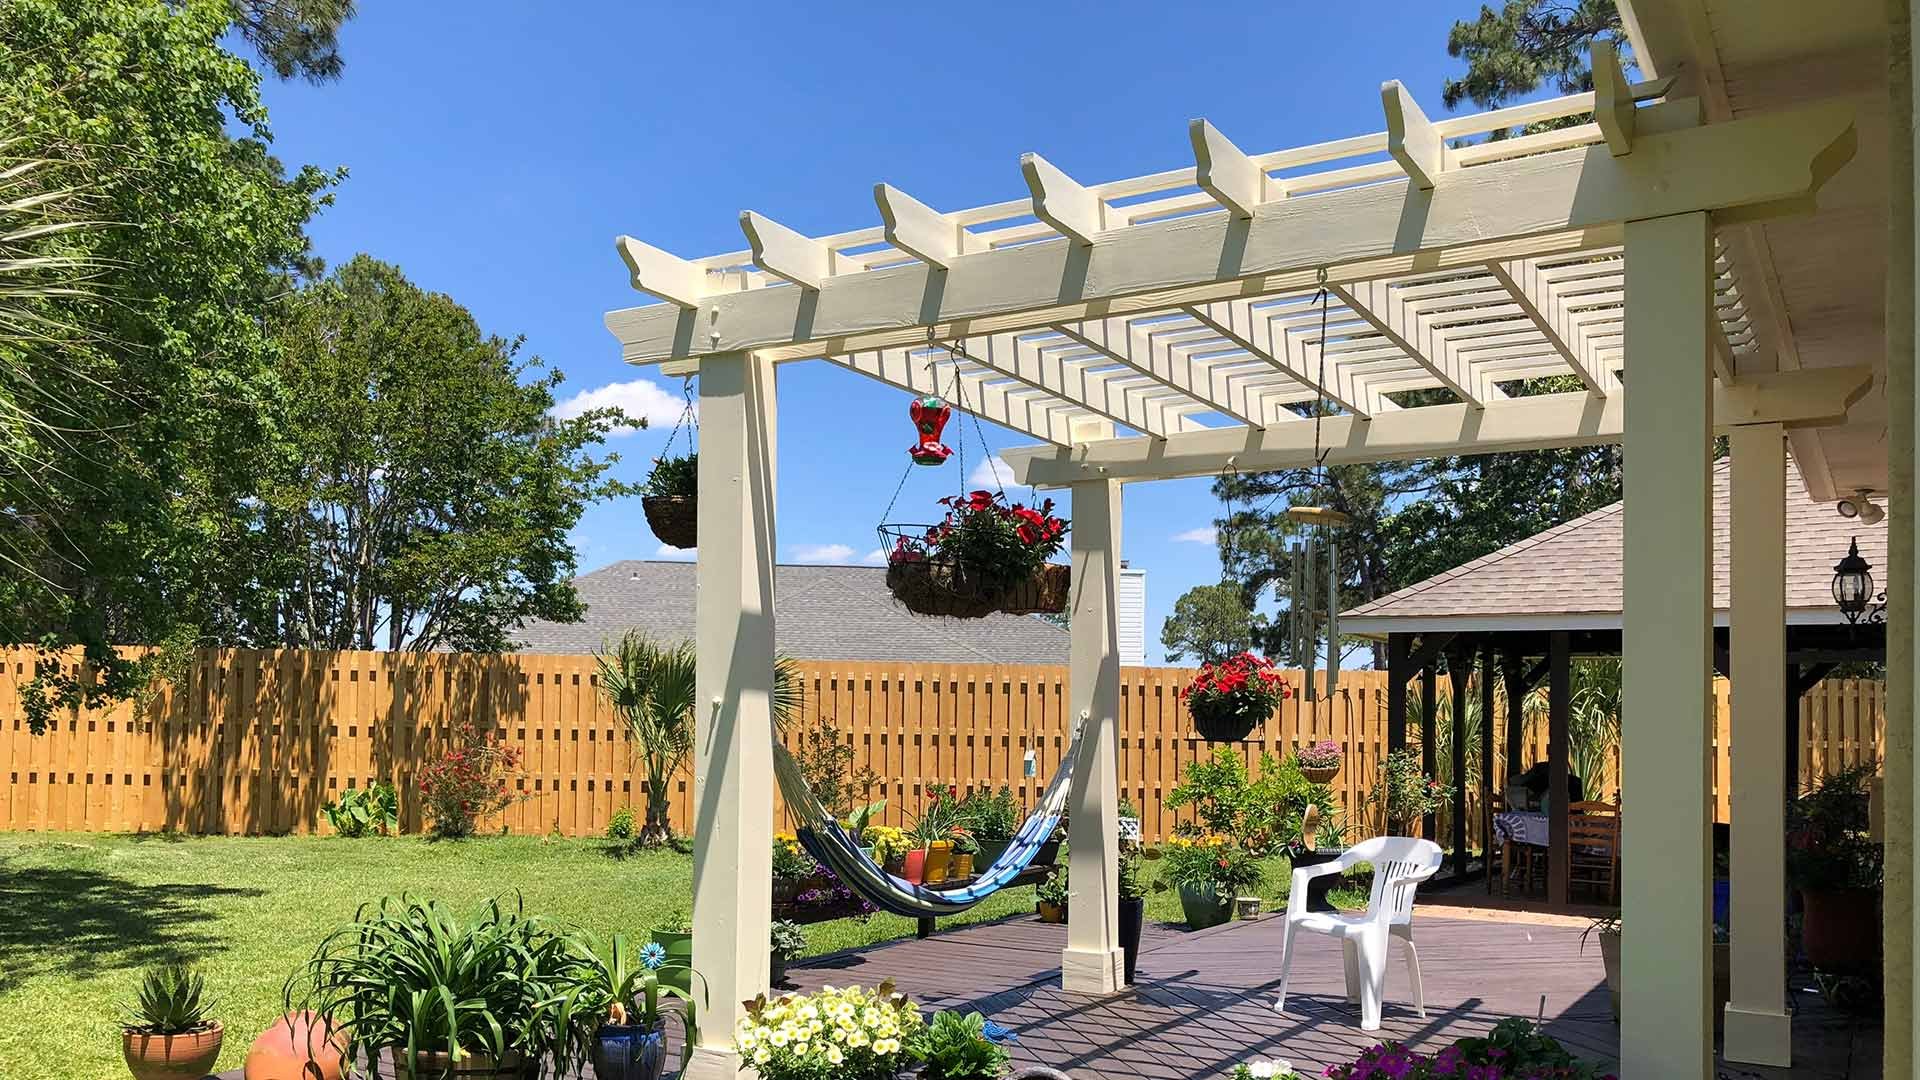 pergola in backyard with plants and deck